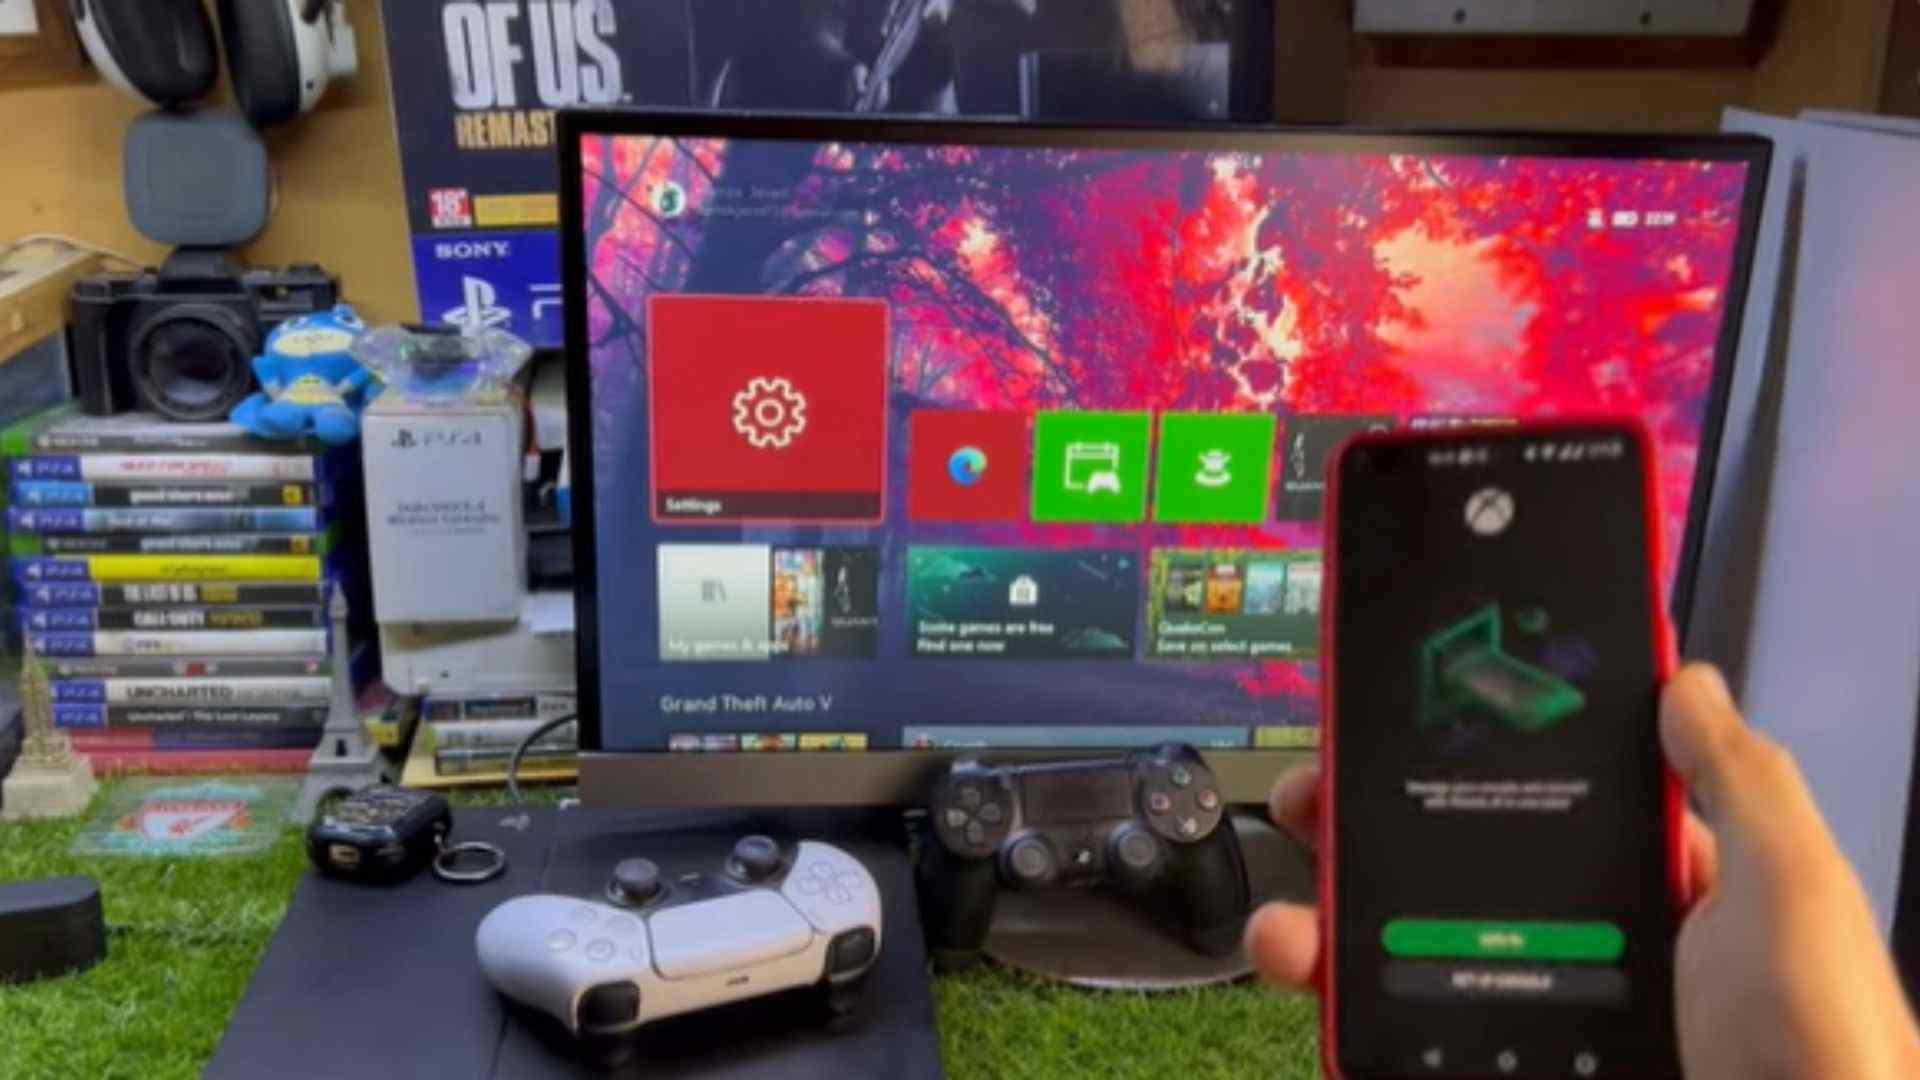 Method # 1: Connect Xbox and Phone with the same Wi-Fi: